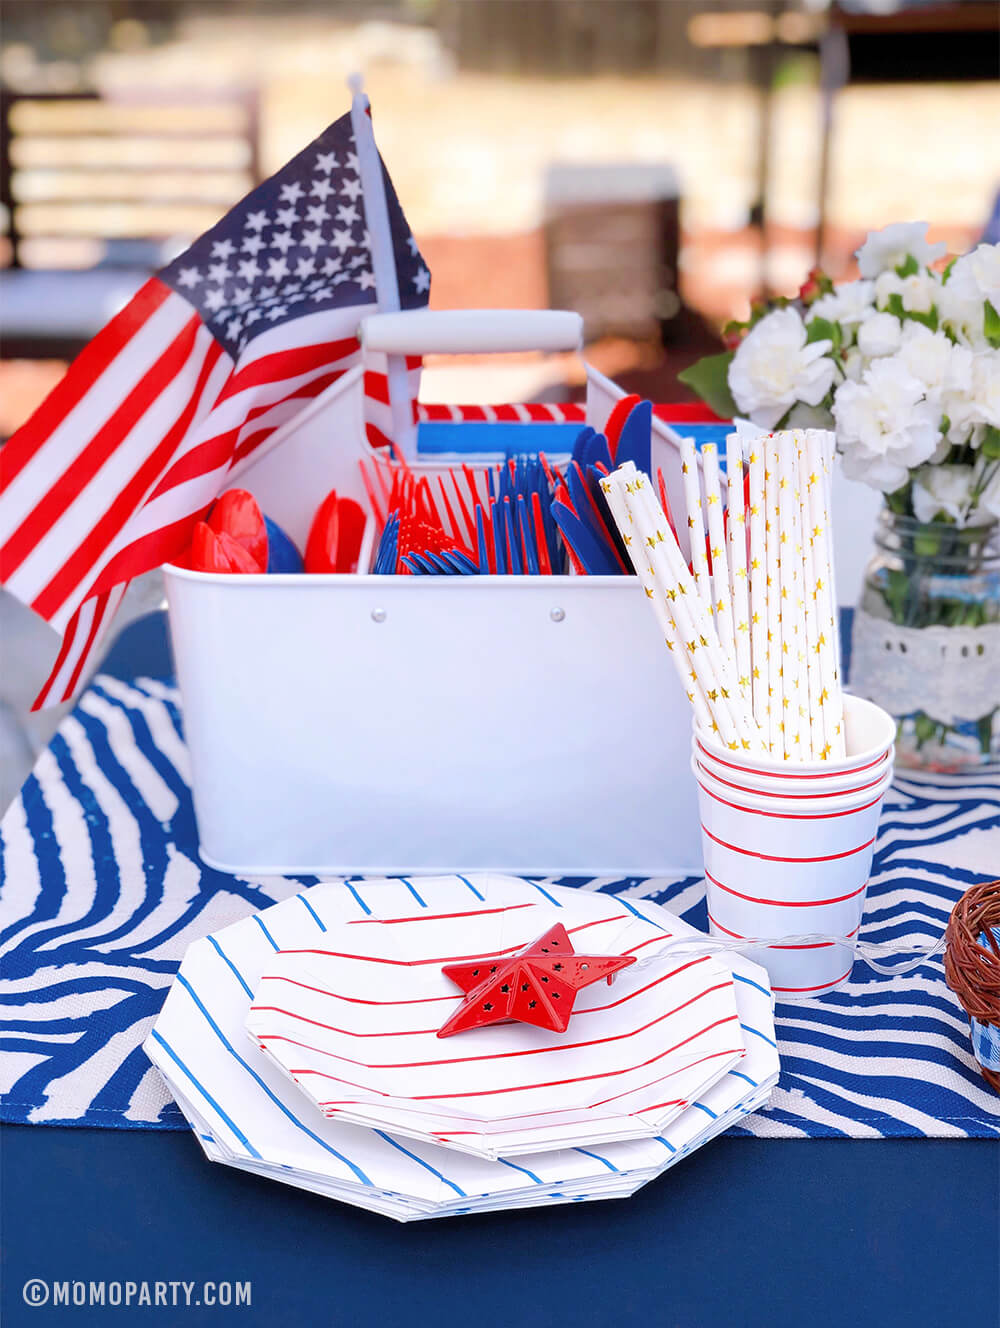 Morden backyard 4th of July Party table set up with Day dream society Blue Striped Large Plates, Red Striped Small Plate, Red Striped Cups, gold start print paper straw, American flag in the cutlery container, flowers on a blue strip table runner.